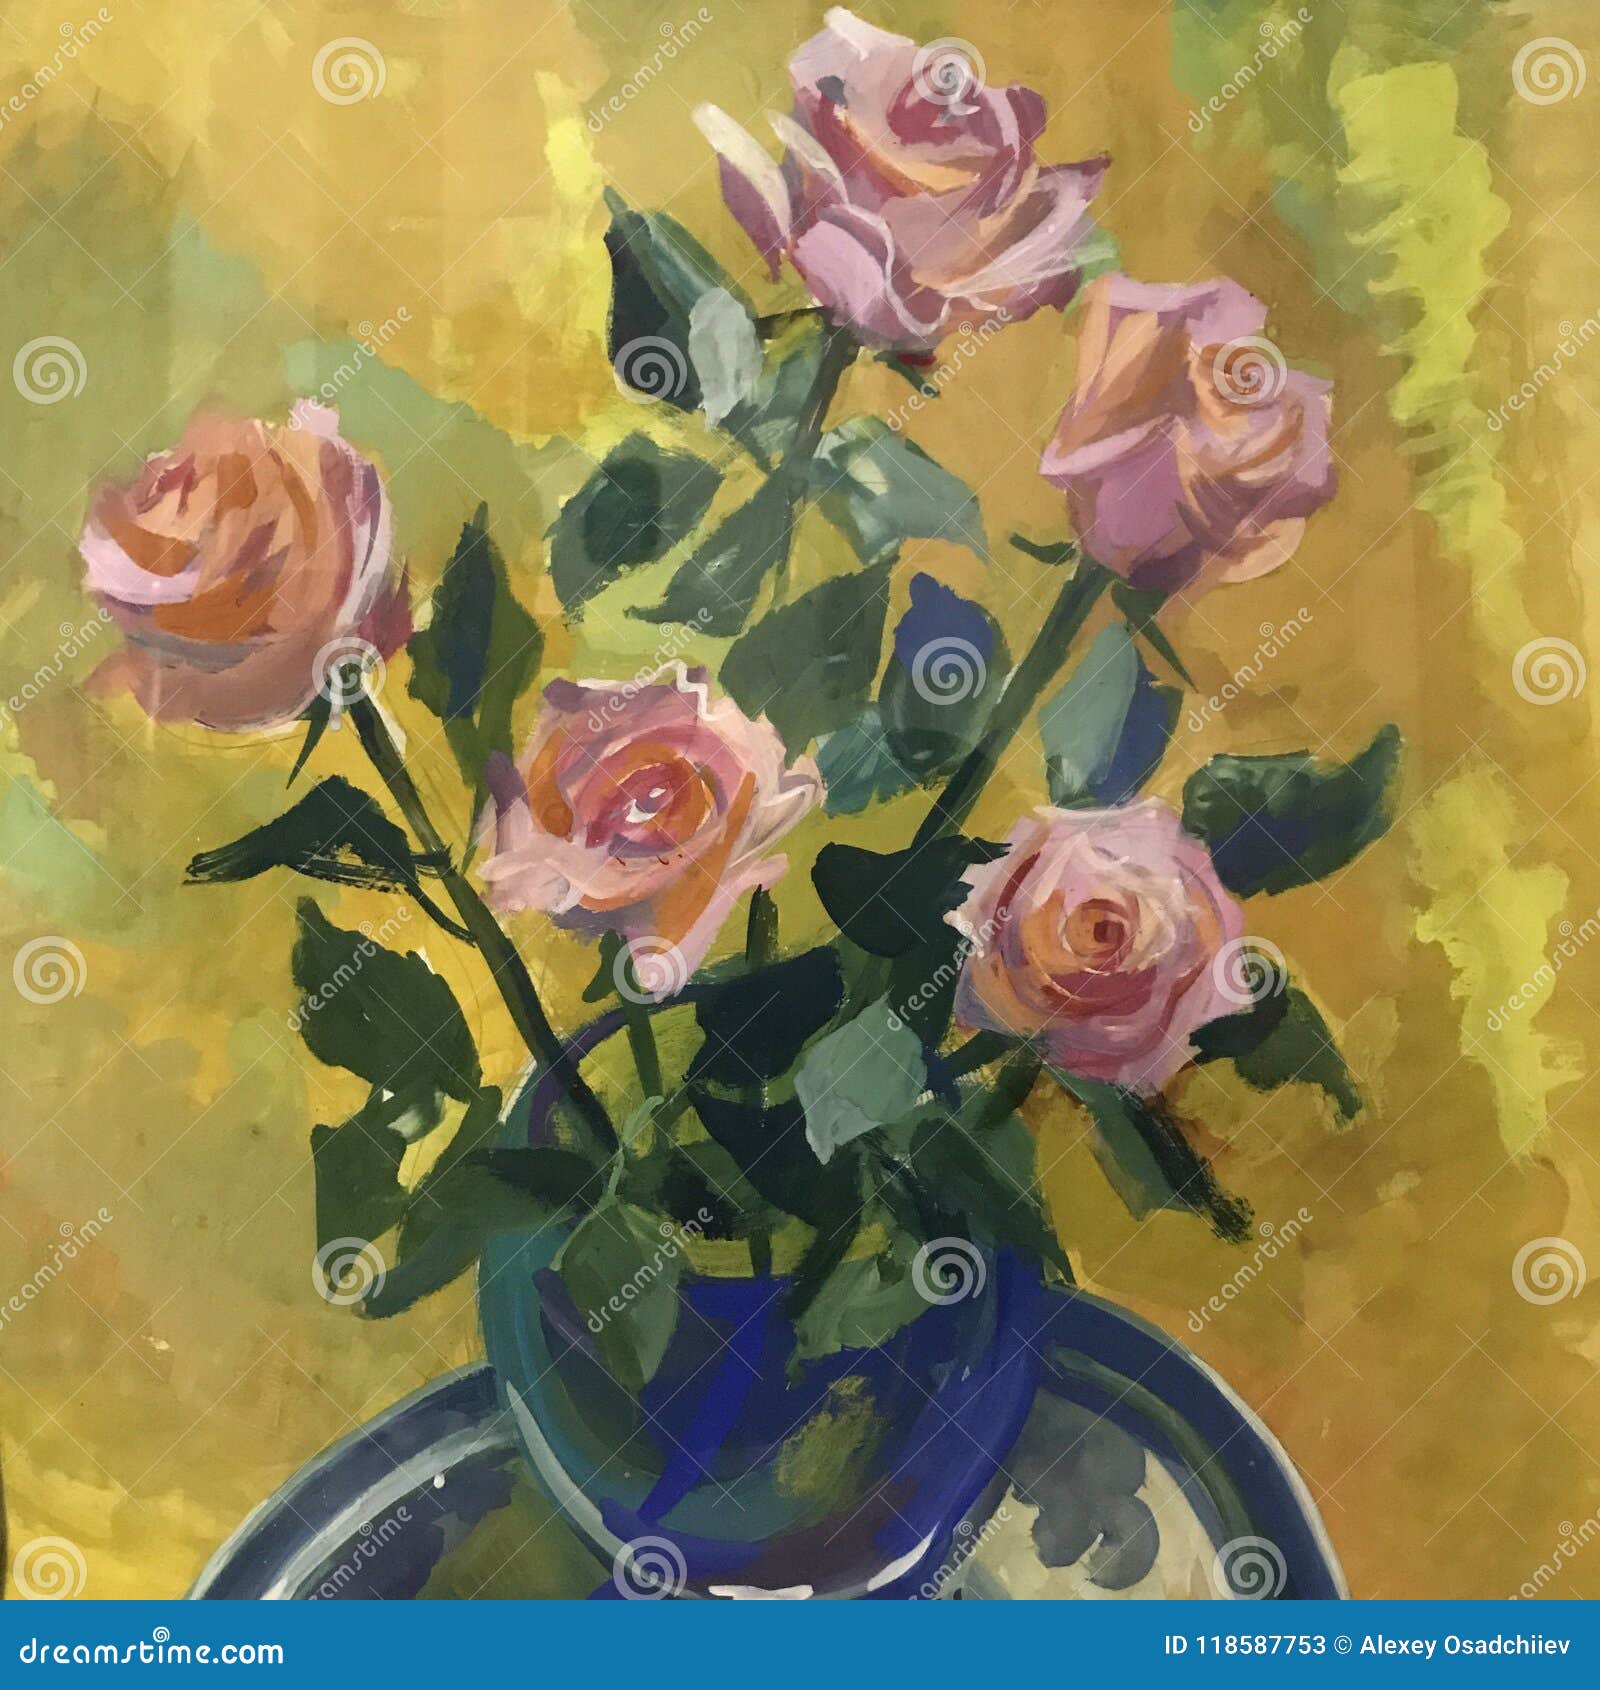 Pink roses bouquet still life bright oil painting 14x14